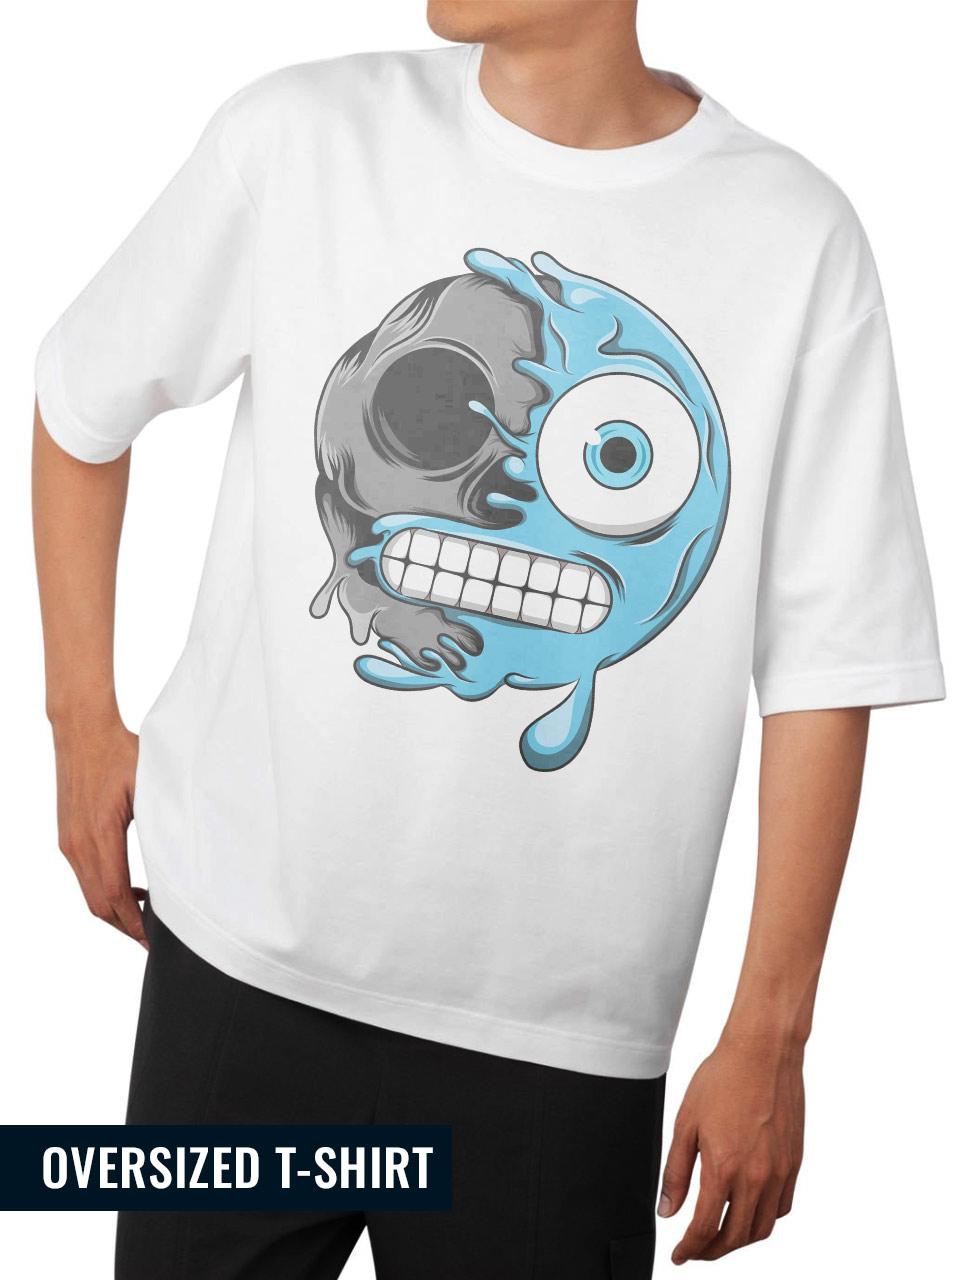 Frosty Skull Arctic Chill-Out Oversized T-Shirt